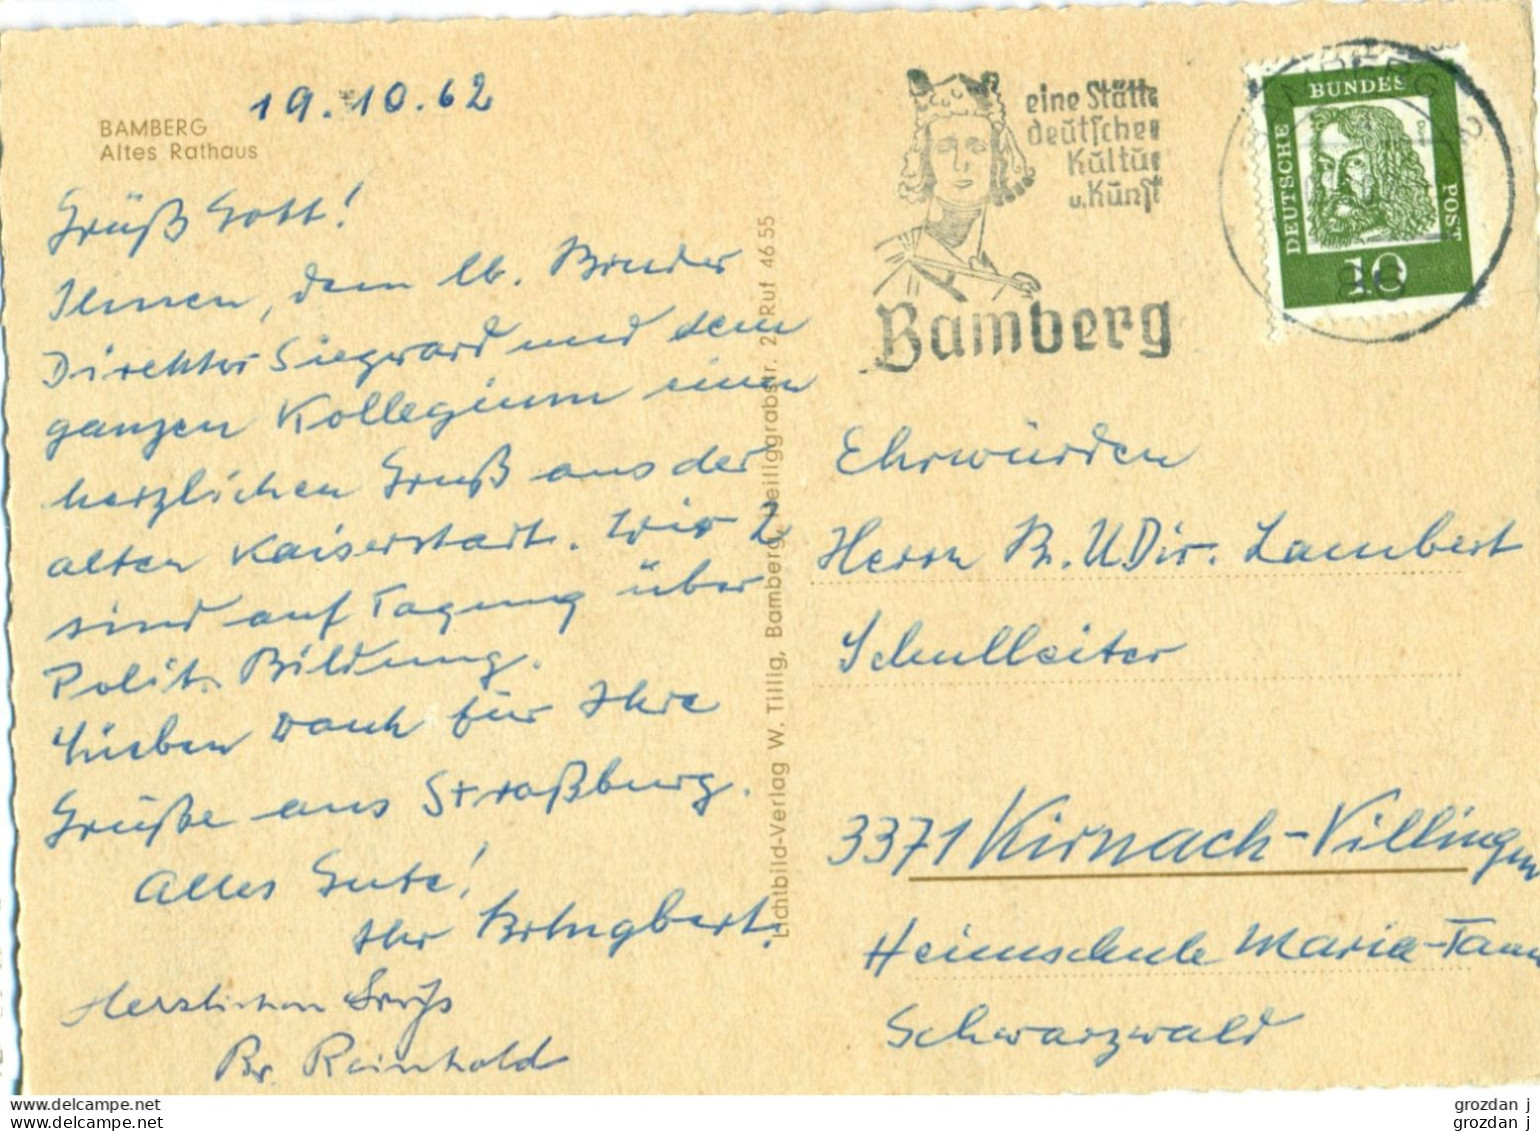 SPRING-CLEANING LOT (2 POSTCARDS), Bamberg, Germany - Bamberg